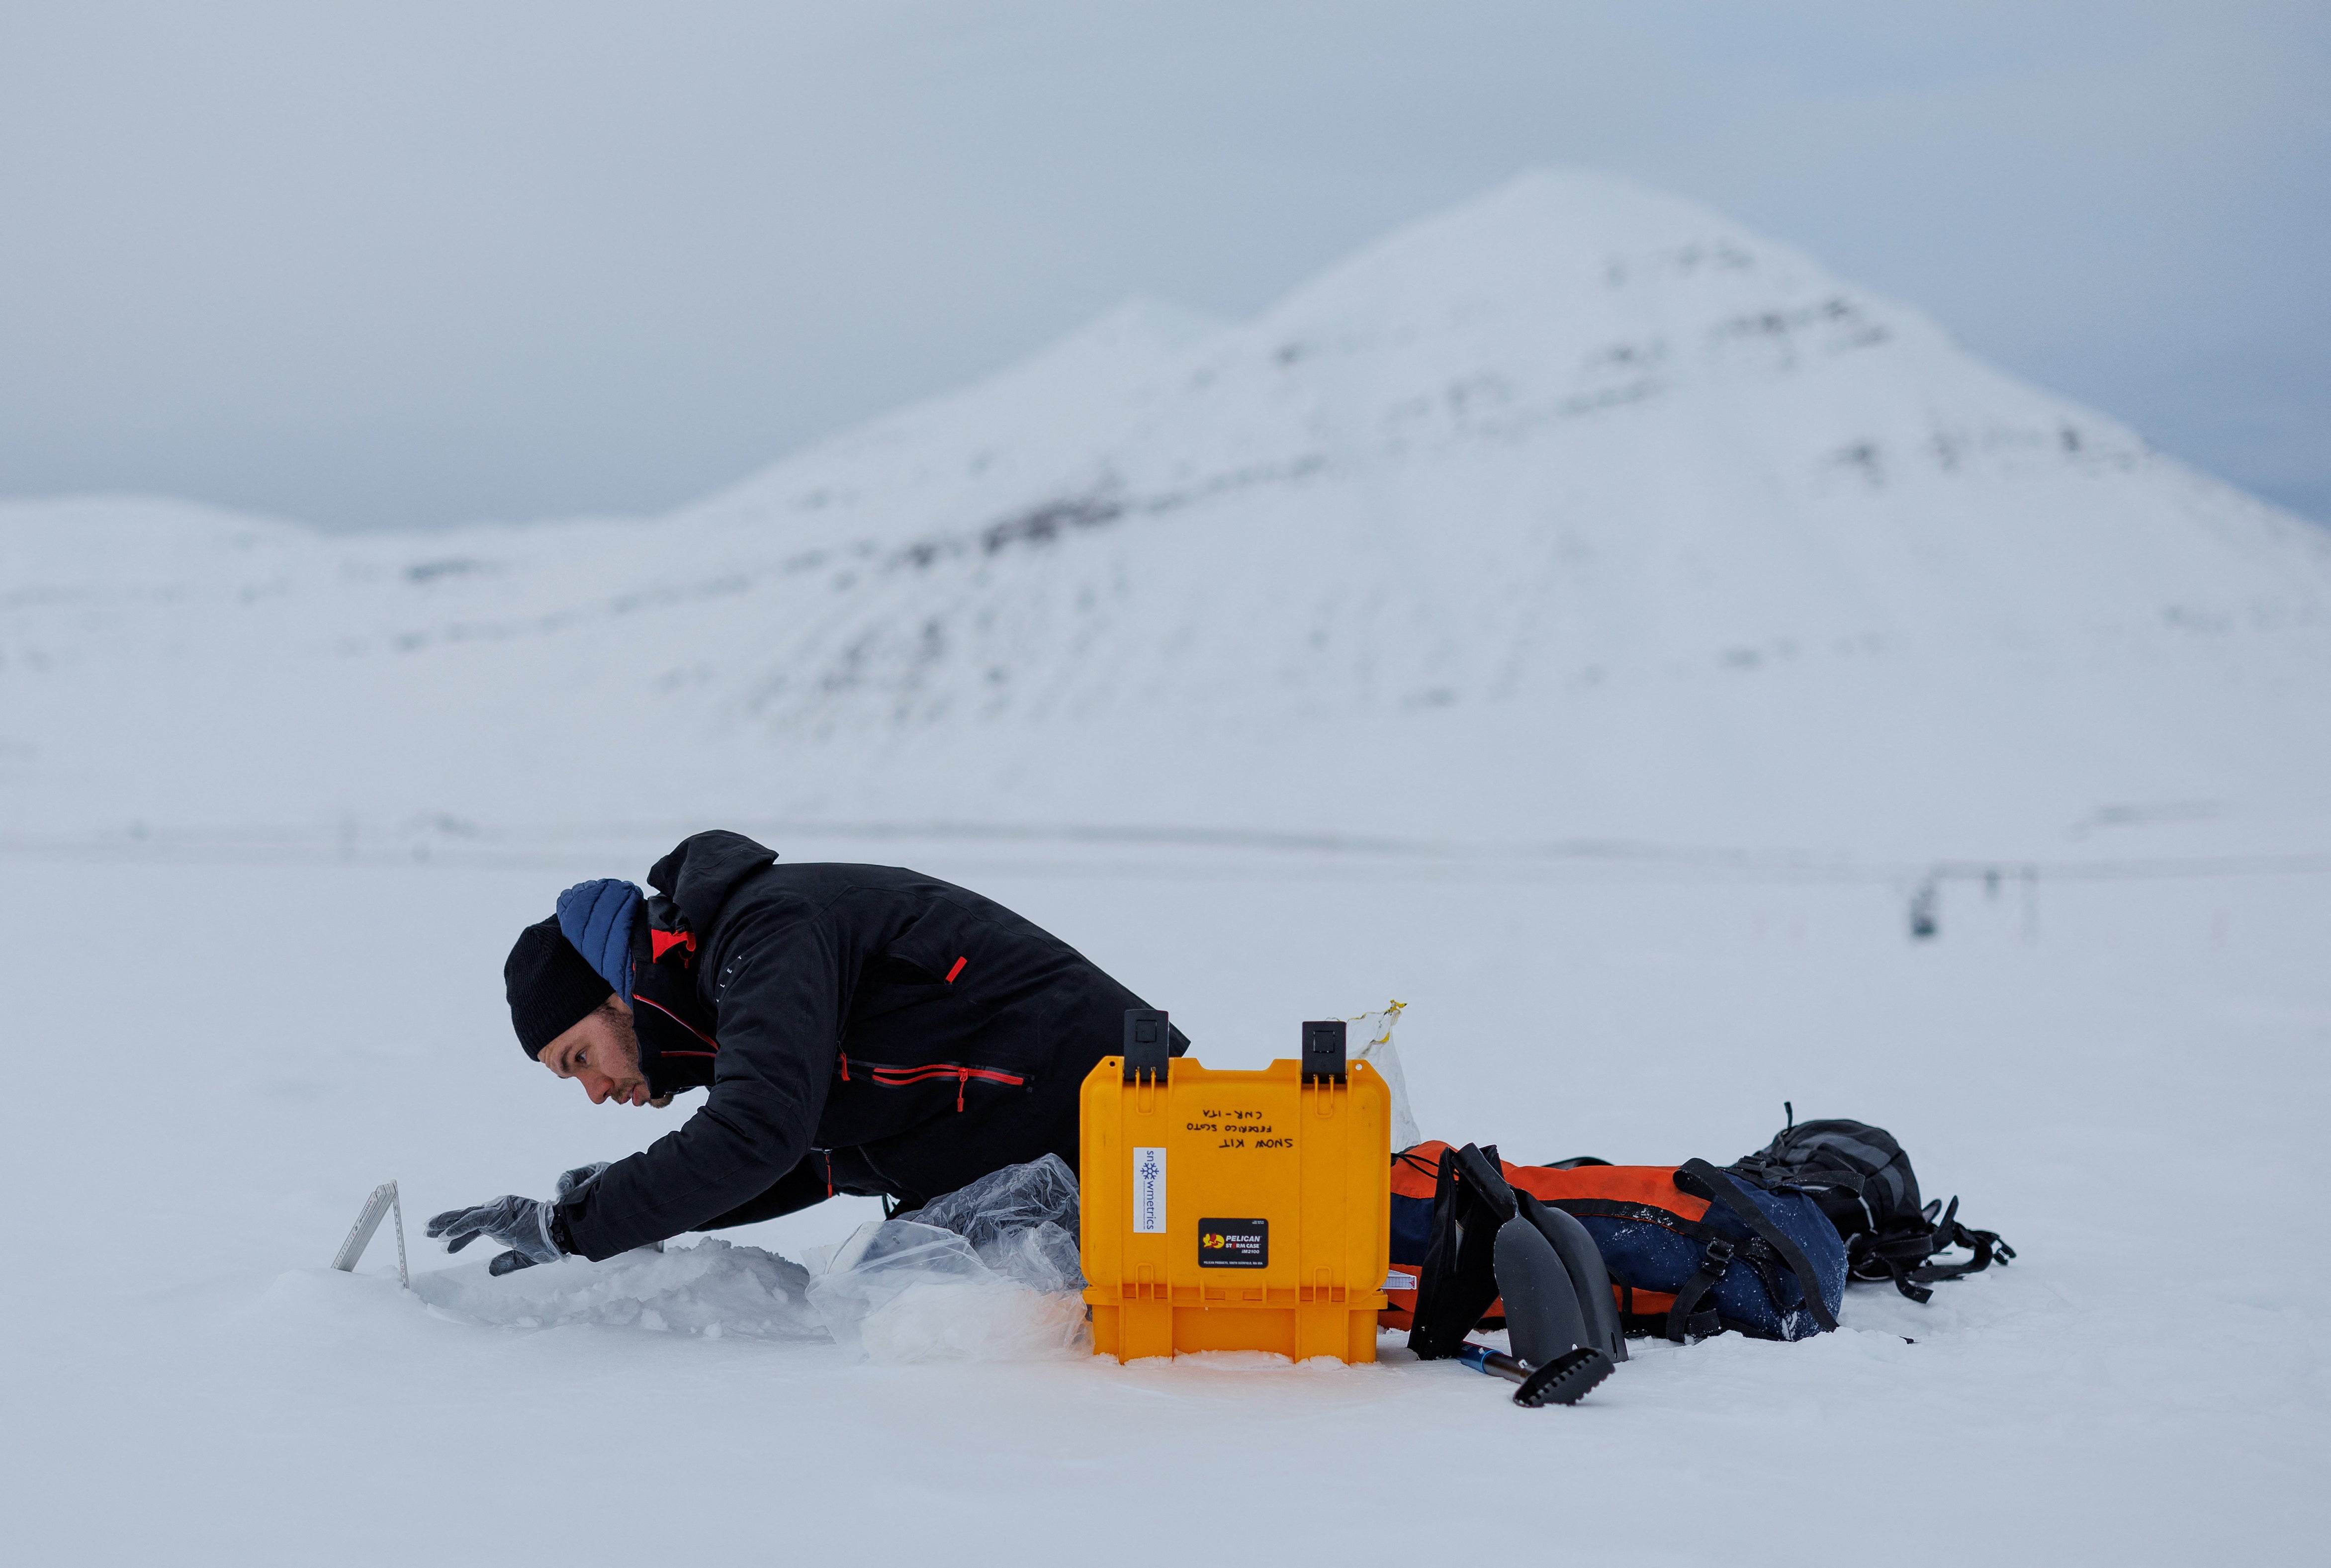 Paul Scherrer Institute Switzerland chemist Francois Burgay, 34, prepares to take a snow sample to detect molecules connected to algal bloom in Ny-Alesund, Svalbard, Norway